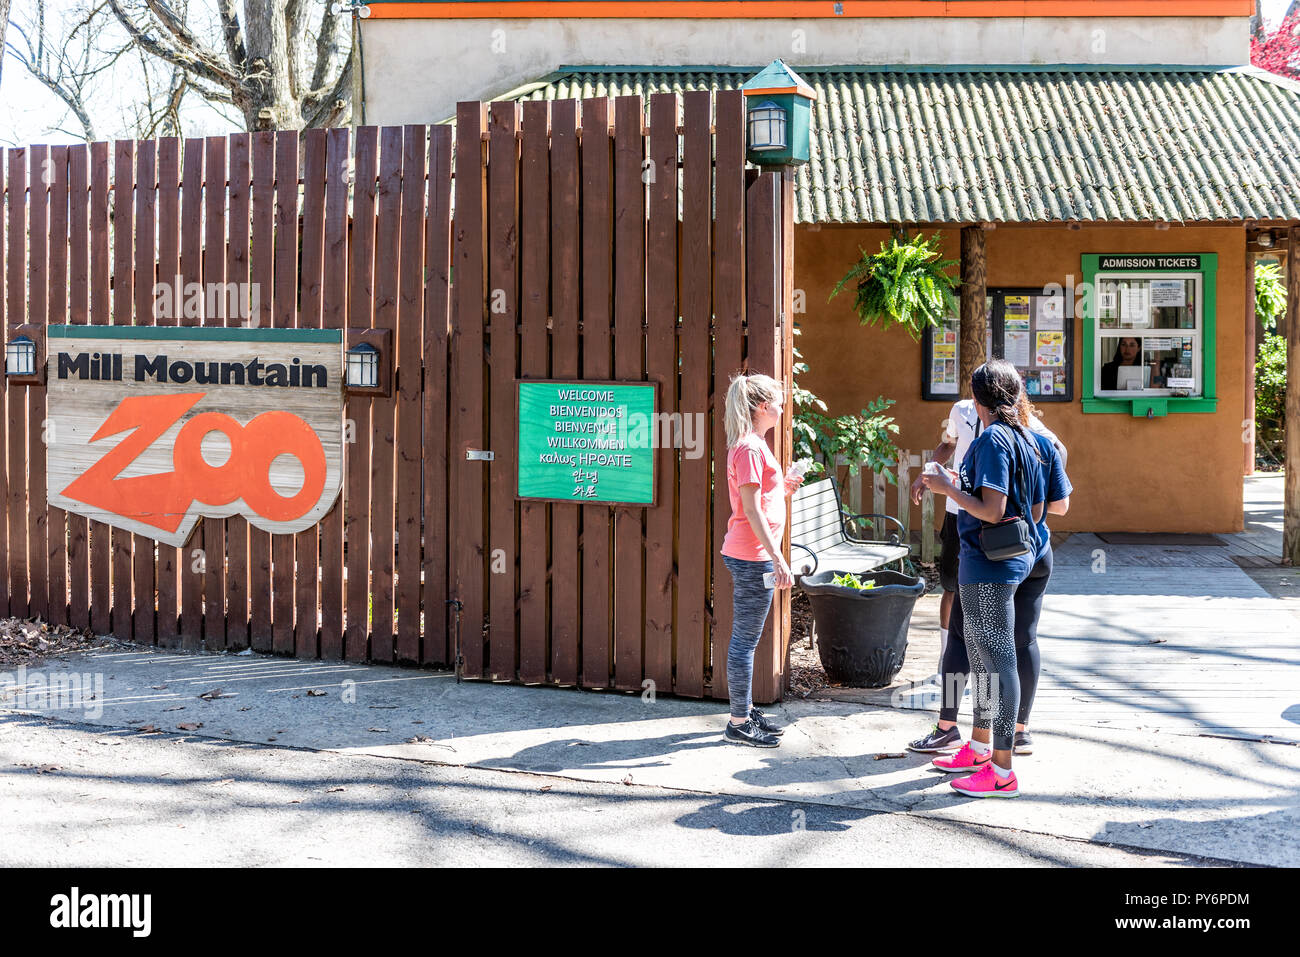 Roanoke, USA - April 18, 2018: Mill Mountain Park in Virginia during spring with sign for Zoo, young people during sunny day, entrance Stock Photo